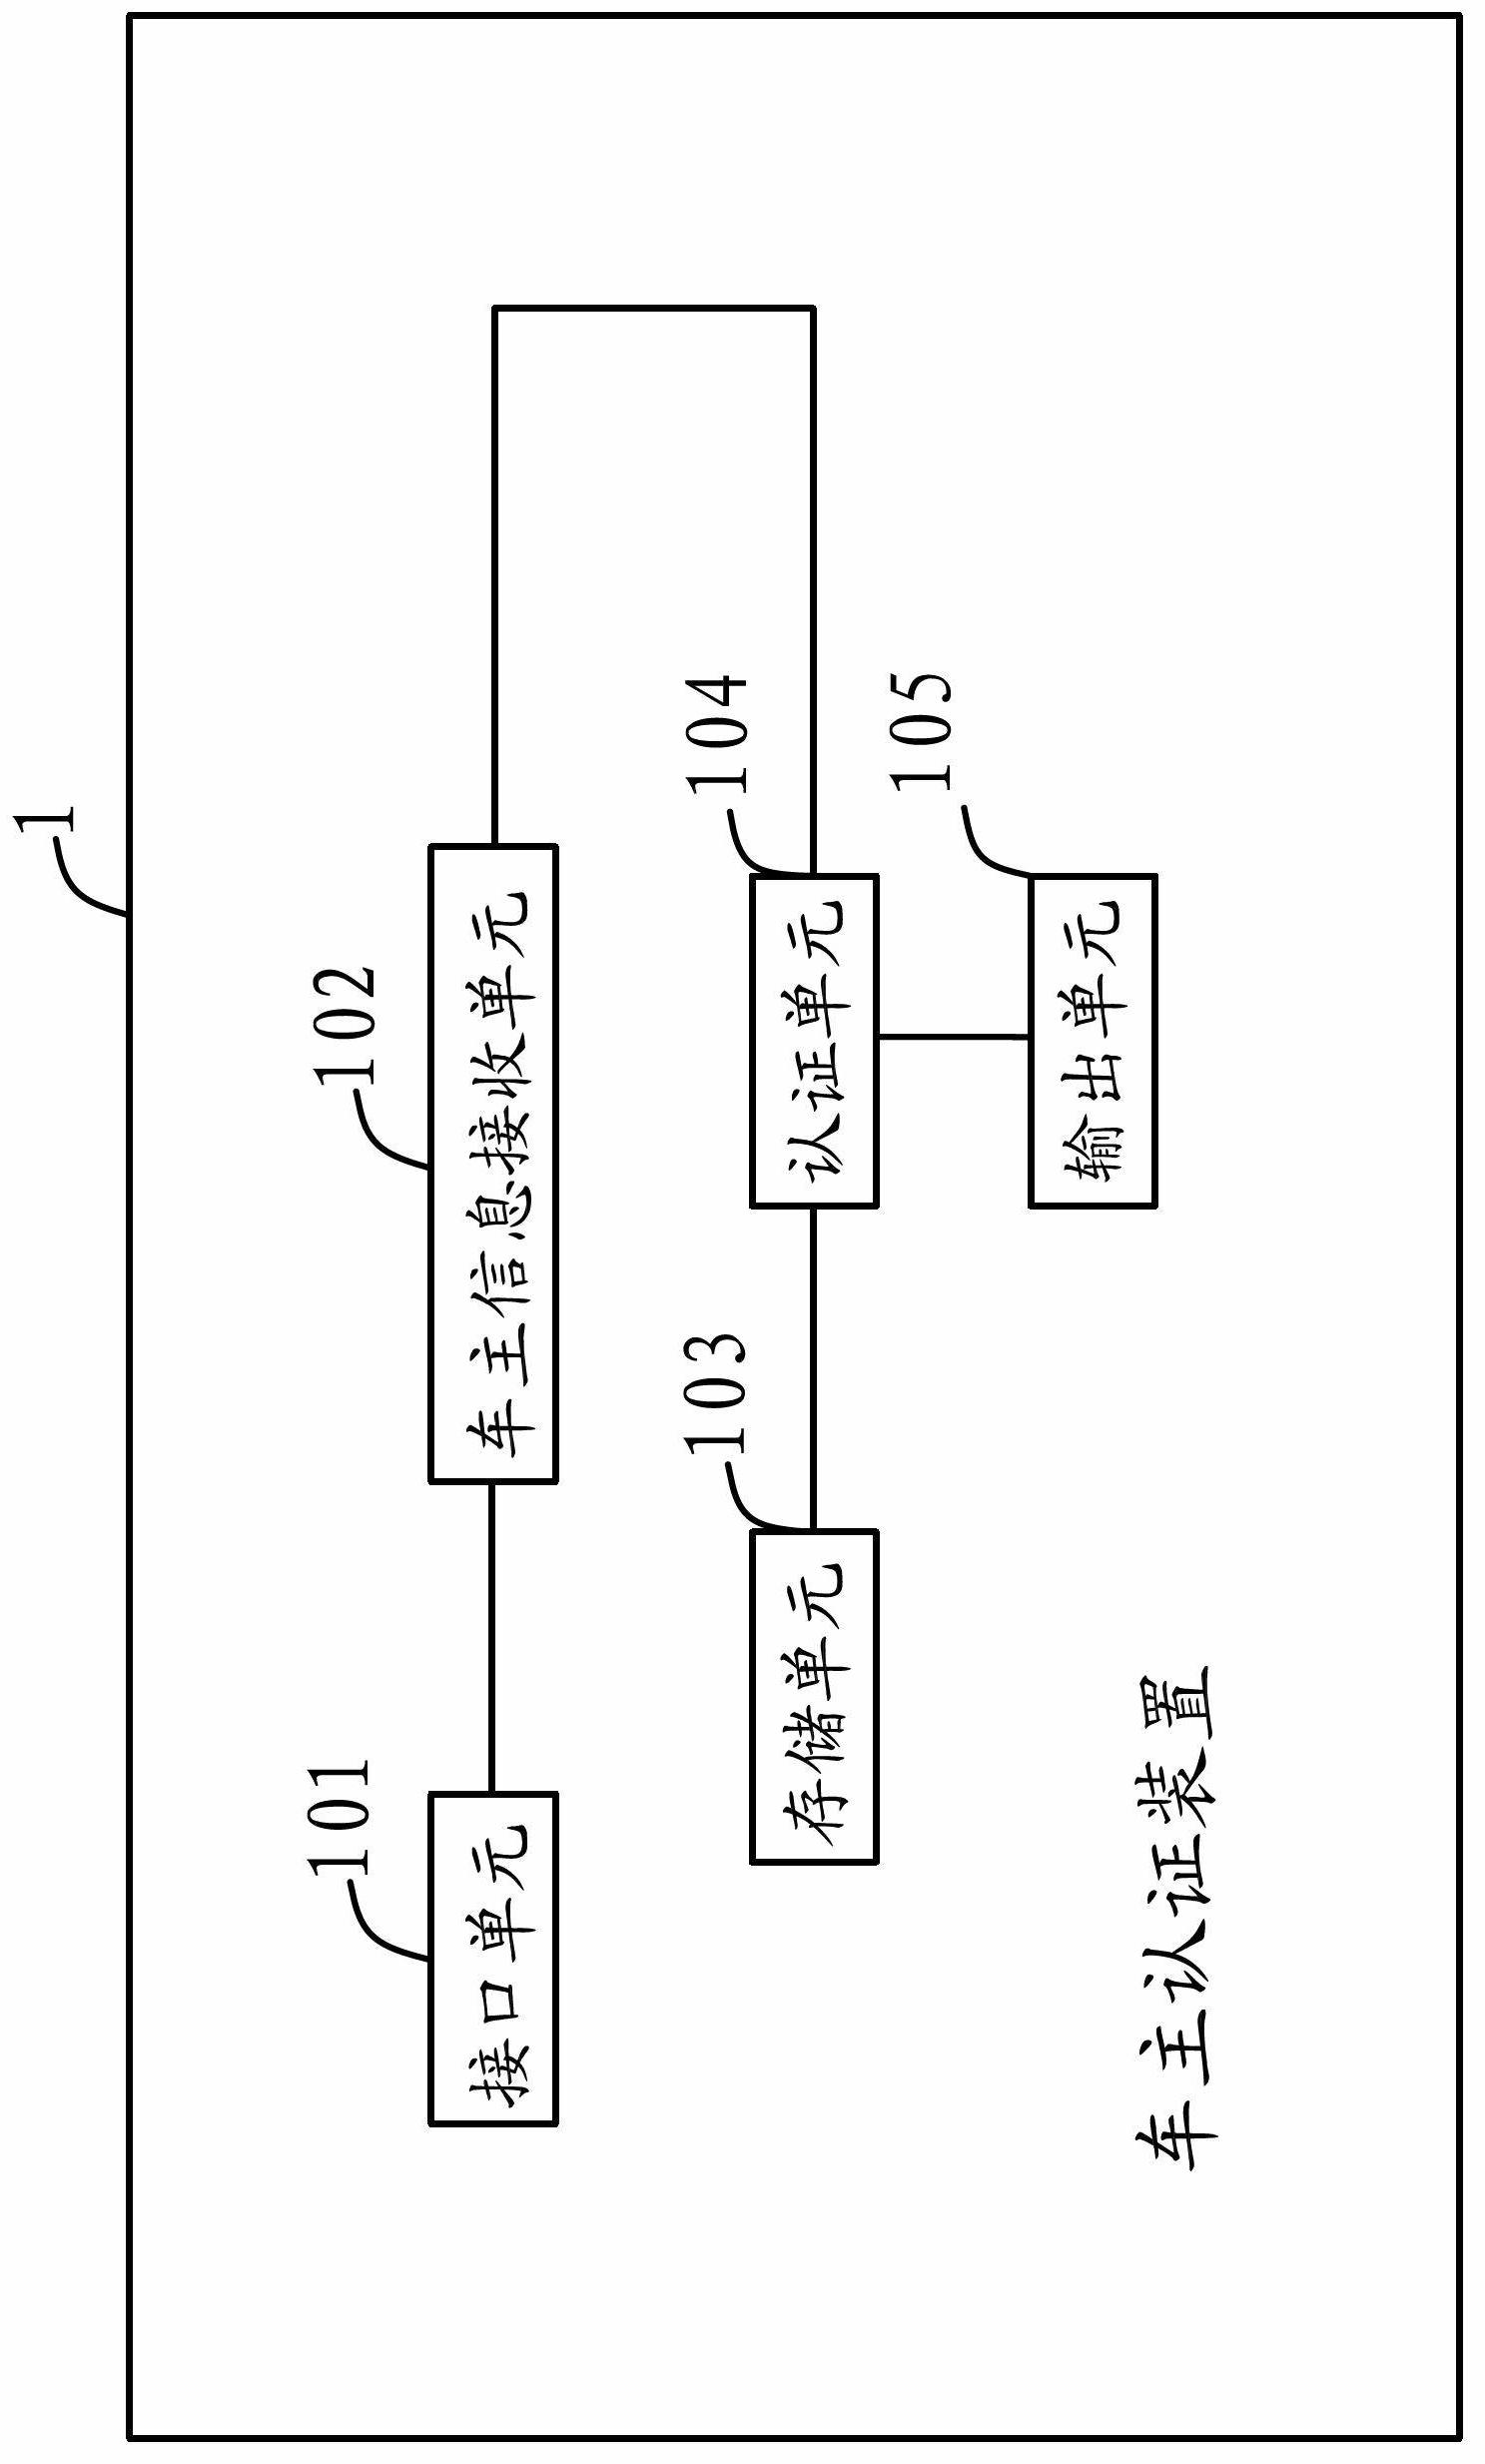 Automobile owner identification device, control system and control method based on near field communication (NFC) mobile phone